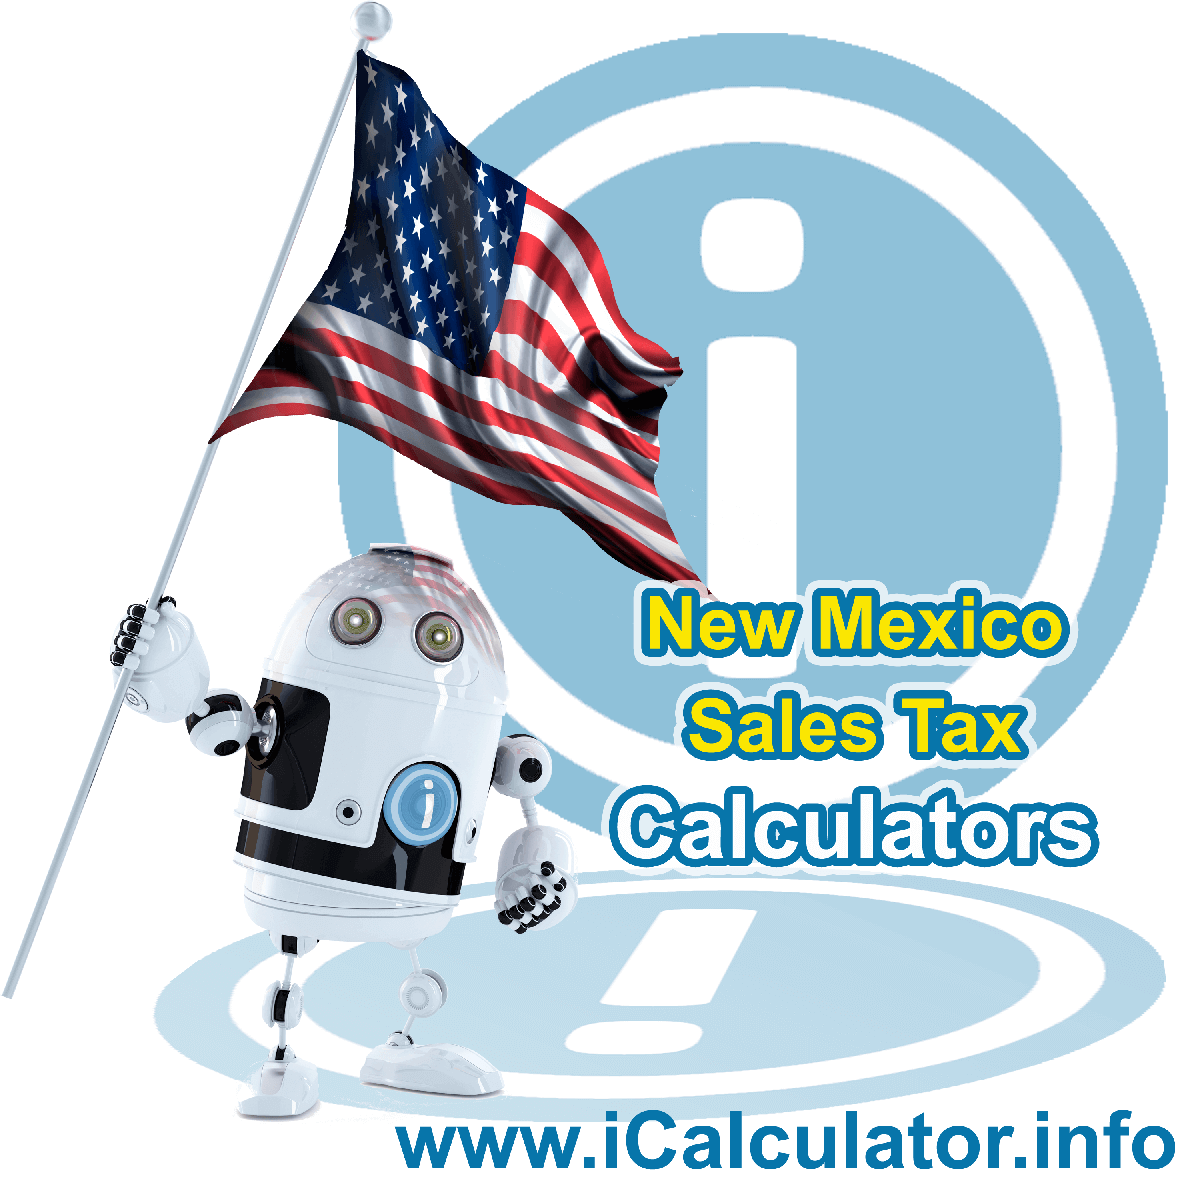 New Mexico Sales Tax Comparison Calculator: This image illustrates a calculator robot comparing sales tax in New Mexico manually using the New Mexico Sales Tax Formula. You can use this information to compare Sales Tax manually or use the New Mexico Sales Tax Comparison Calculator to calculate and compare New Mexico sales tax online.